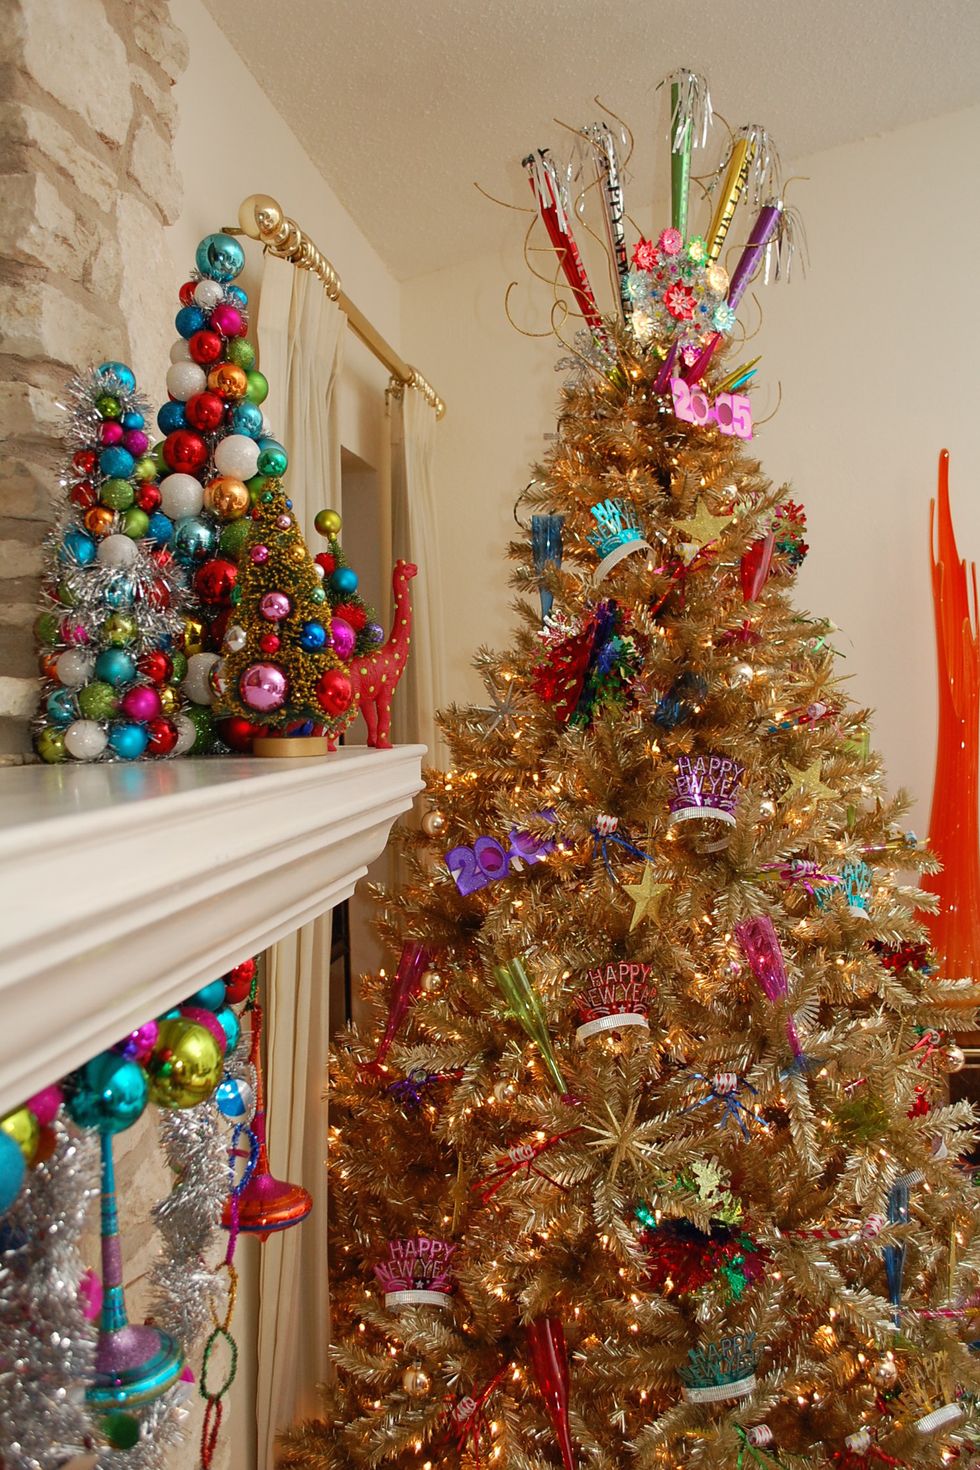 <p>This tinsel tree is the perfect way to dress up your living room for a fancy fete. Here,&nbsp;blogger <a href="https://jenniferperkins.com/" target="_blank" data-tracking-id="recirc-text-link">Jennifer Perkins</a> outfitted her tree with champagne flutes, party hats&nbsp;and more festive trinkets. </p><p><em data-redactor-tag="em"><a href="http://blog.treetopia.com/2014/12/new-years-eve-tree/" target="_blank" data-tracking-id="recirc-text-link" data-href="http://blog.treetopia.com/2014/12/new-years-eve-tree/">Get the tutorial from Treetopia »</a></em></p>